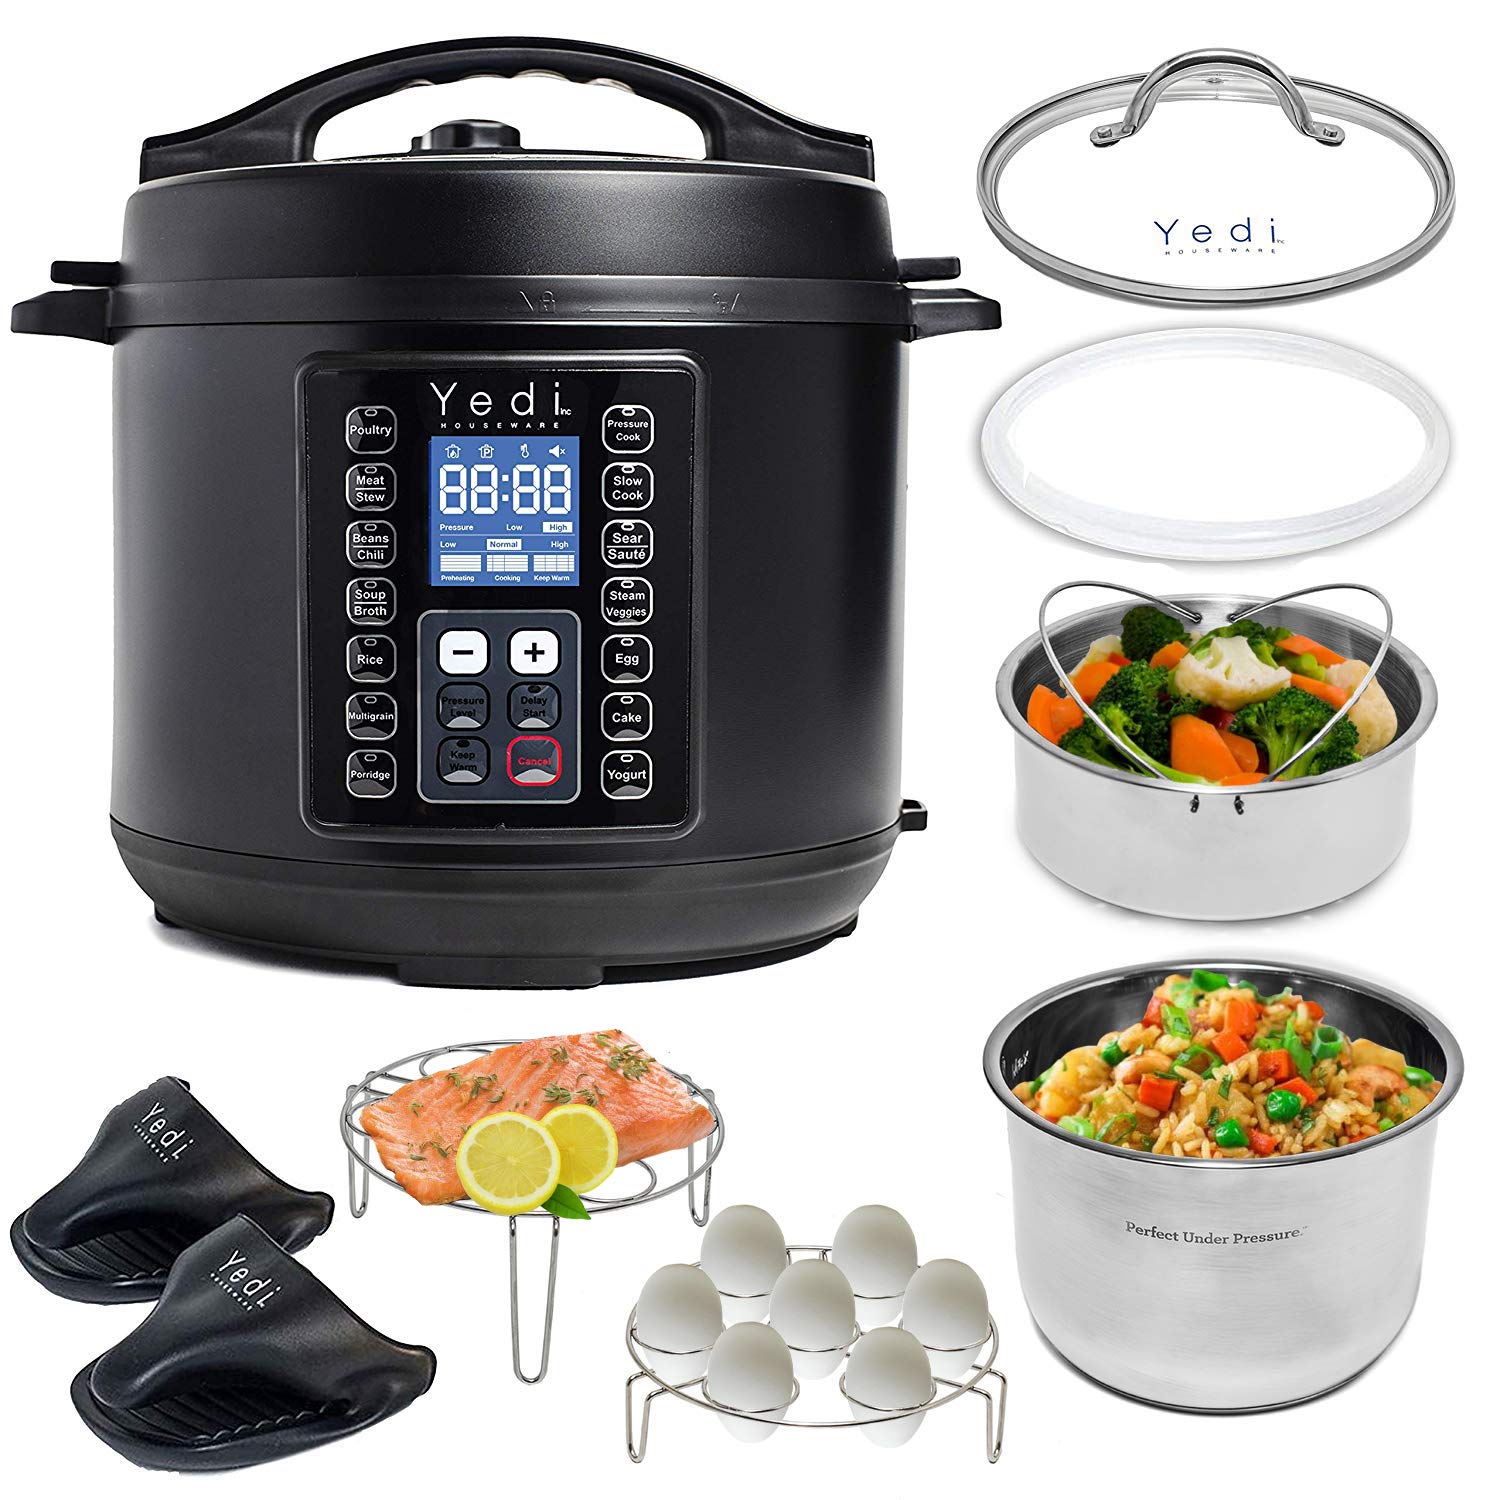 Yedi 9-in-1 Total Package Instant Programmable Pressure Cooker, Slow Cooker, Rice Cooker, Yogurt, Sauté, Steamer. Deluxe Accessory Kit, Recipe Book, Cheat Sheets, 2-Year Warranty, 6 Quart, Black.